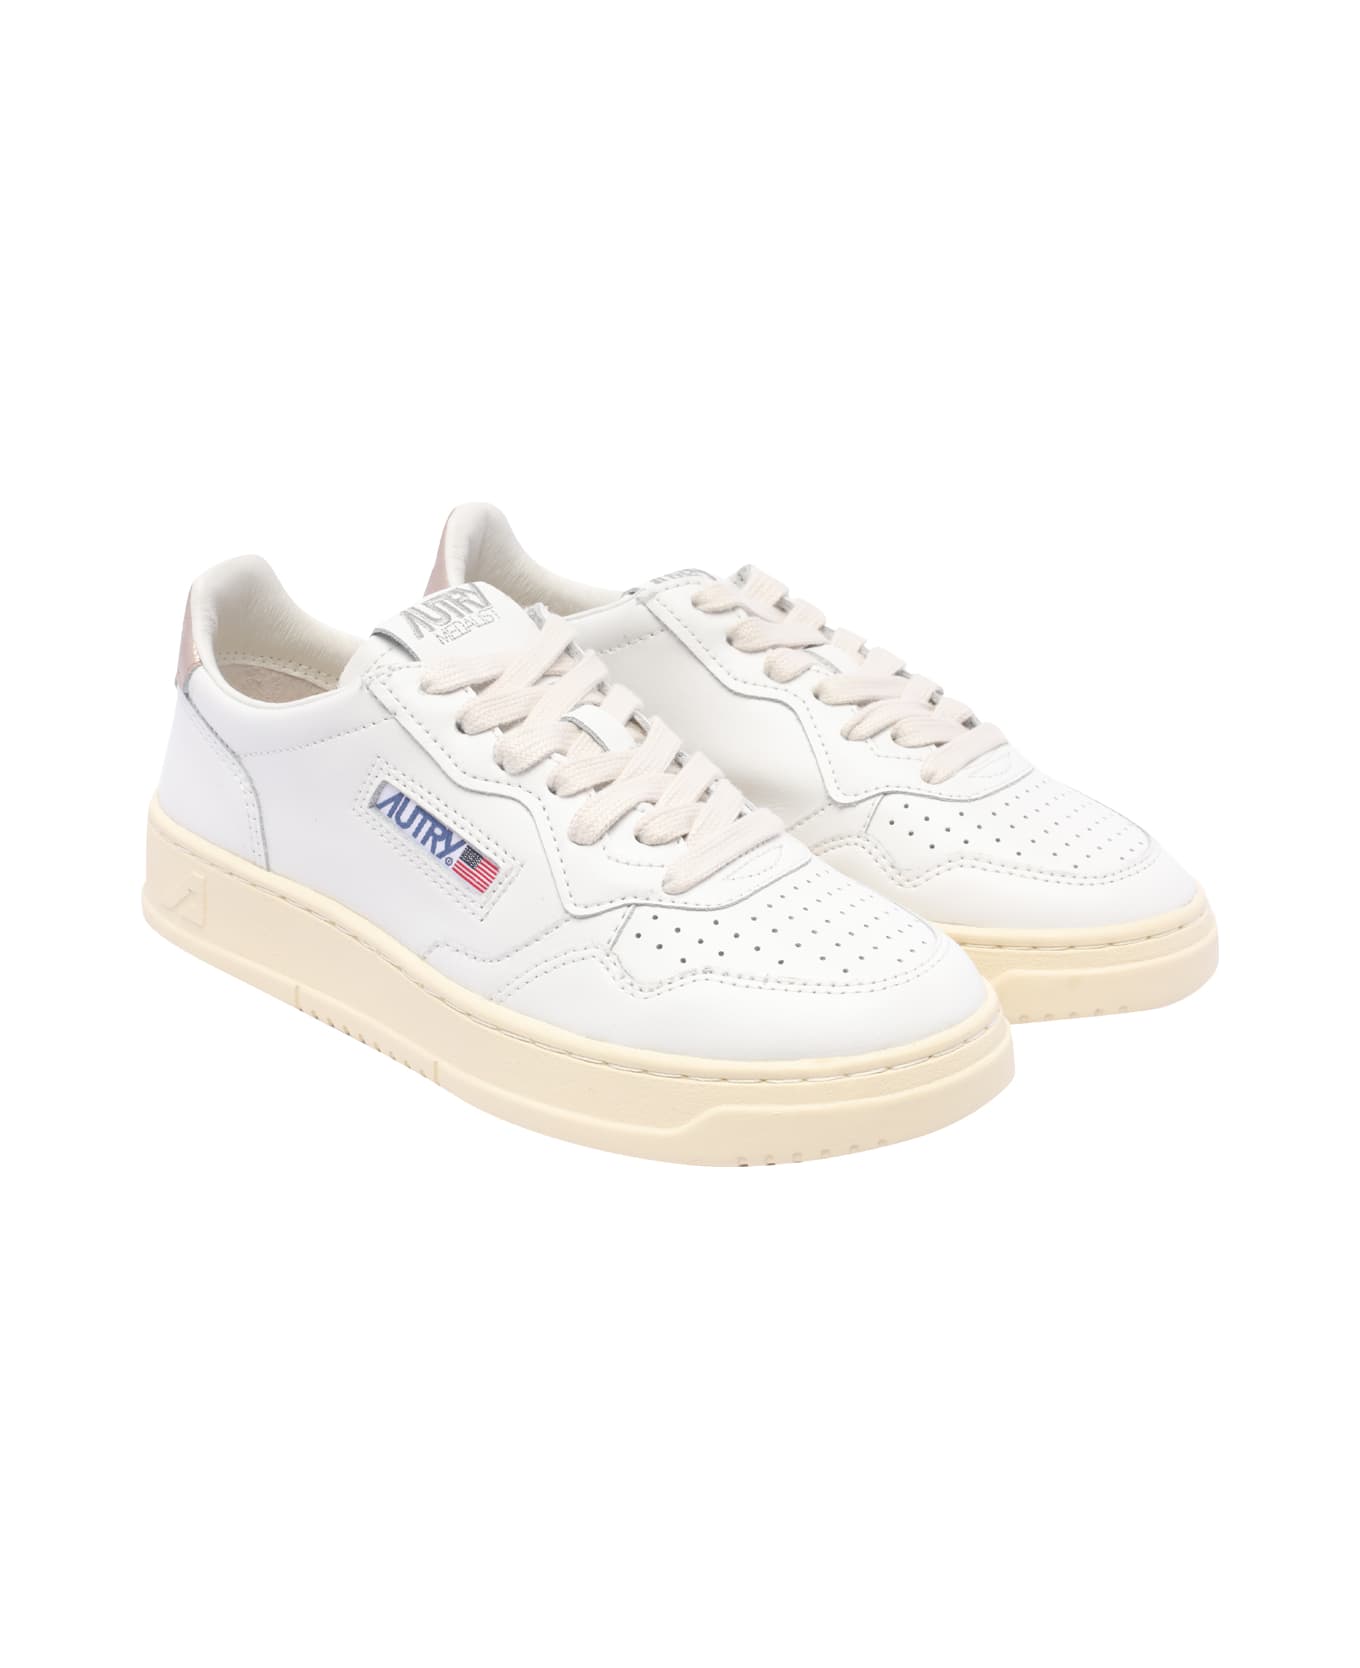 Autry Medalist Low Sneakers - Wht/gold